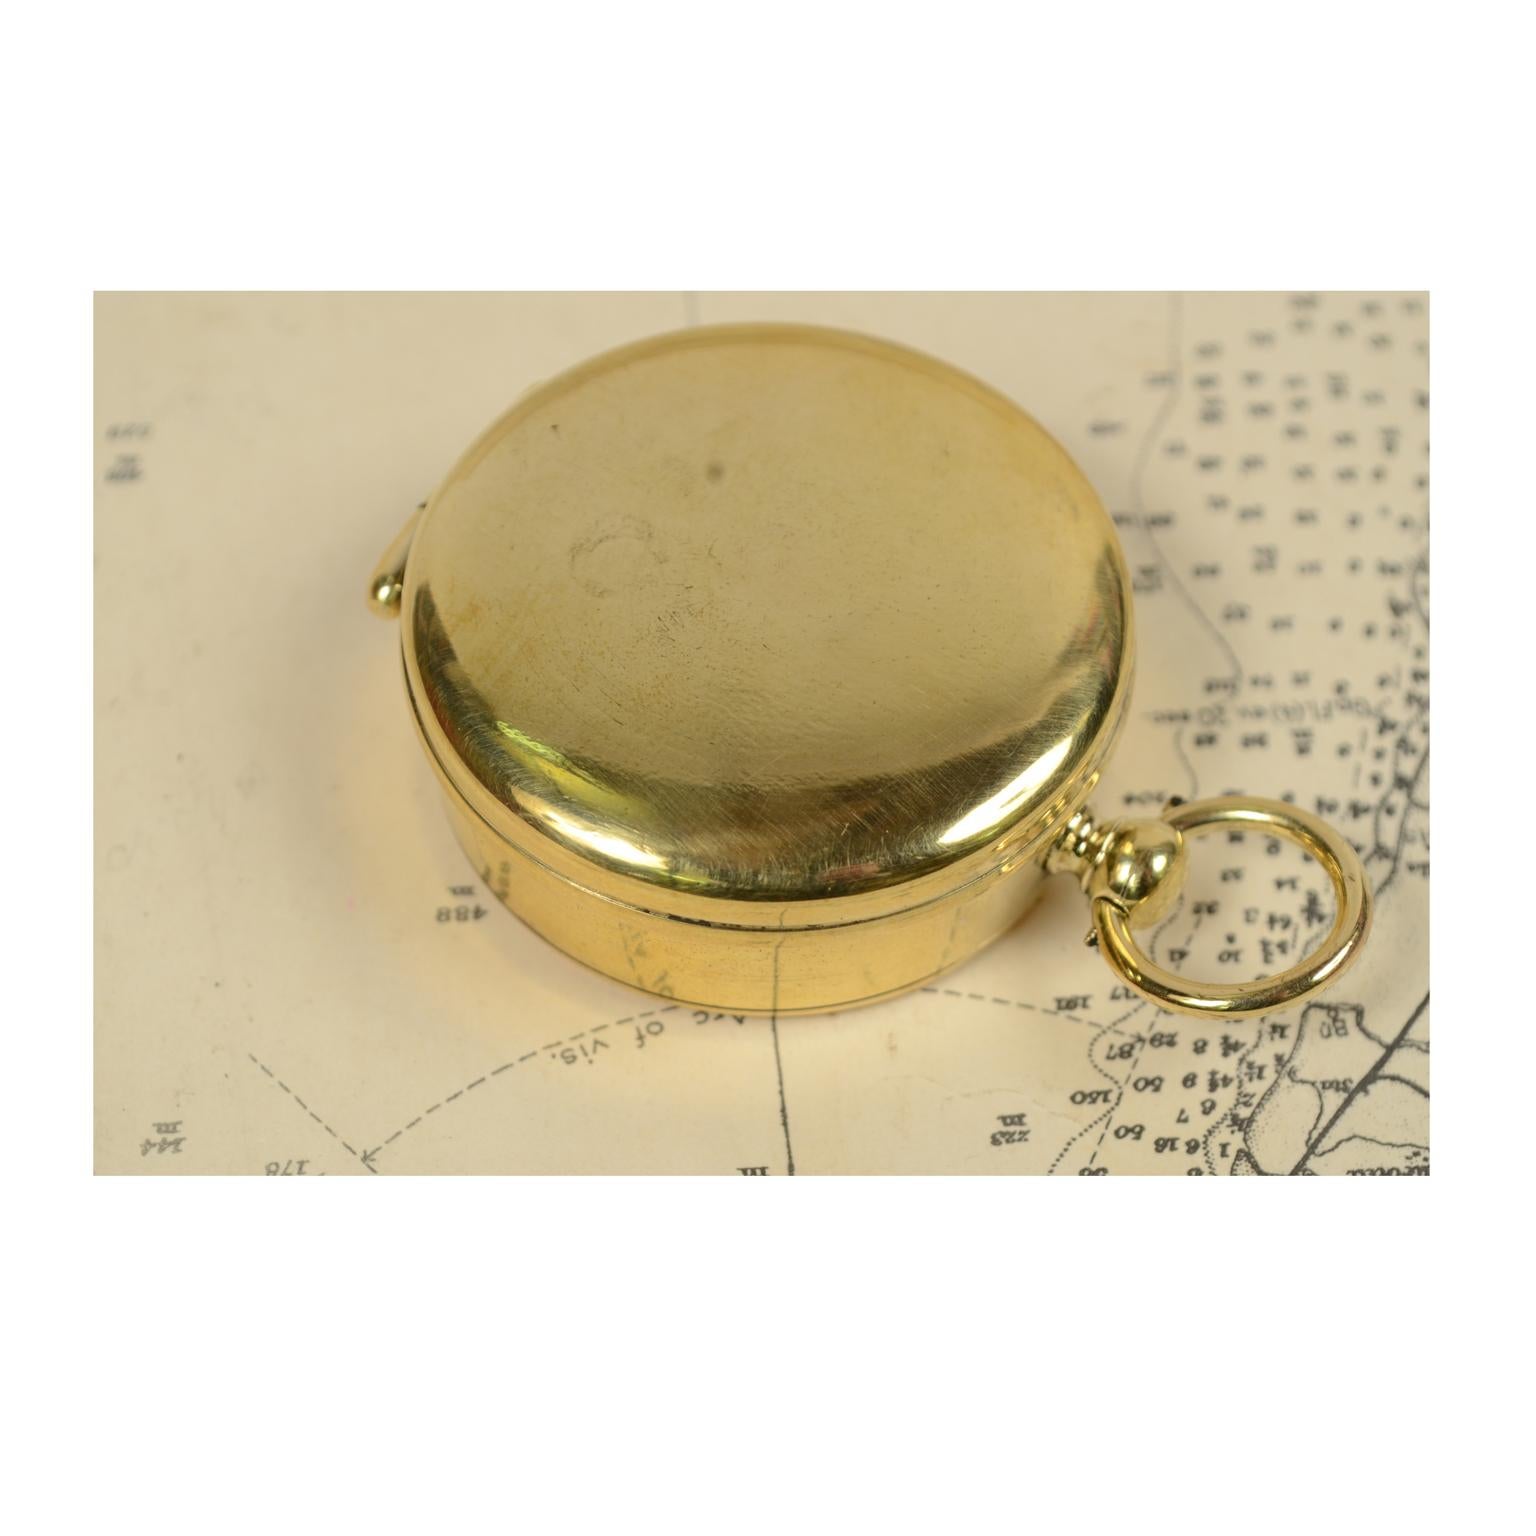 British Brass Compass Made in England in the Early 1900s with its Leather Case